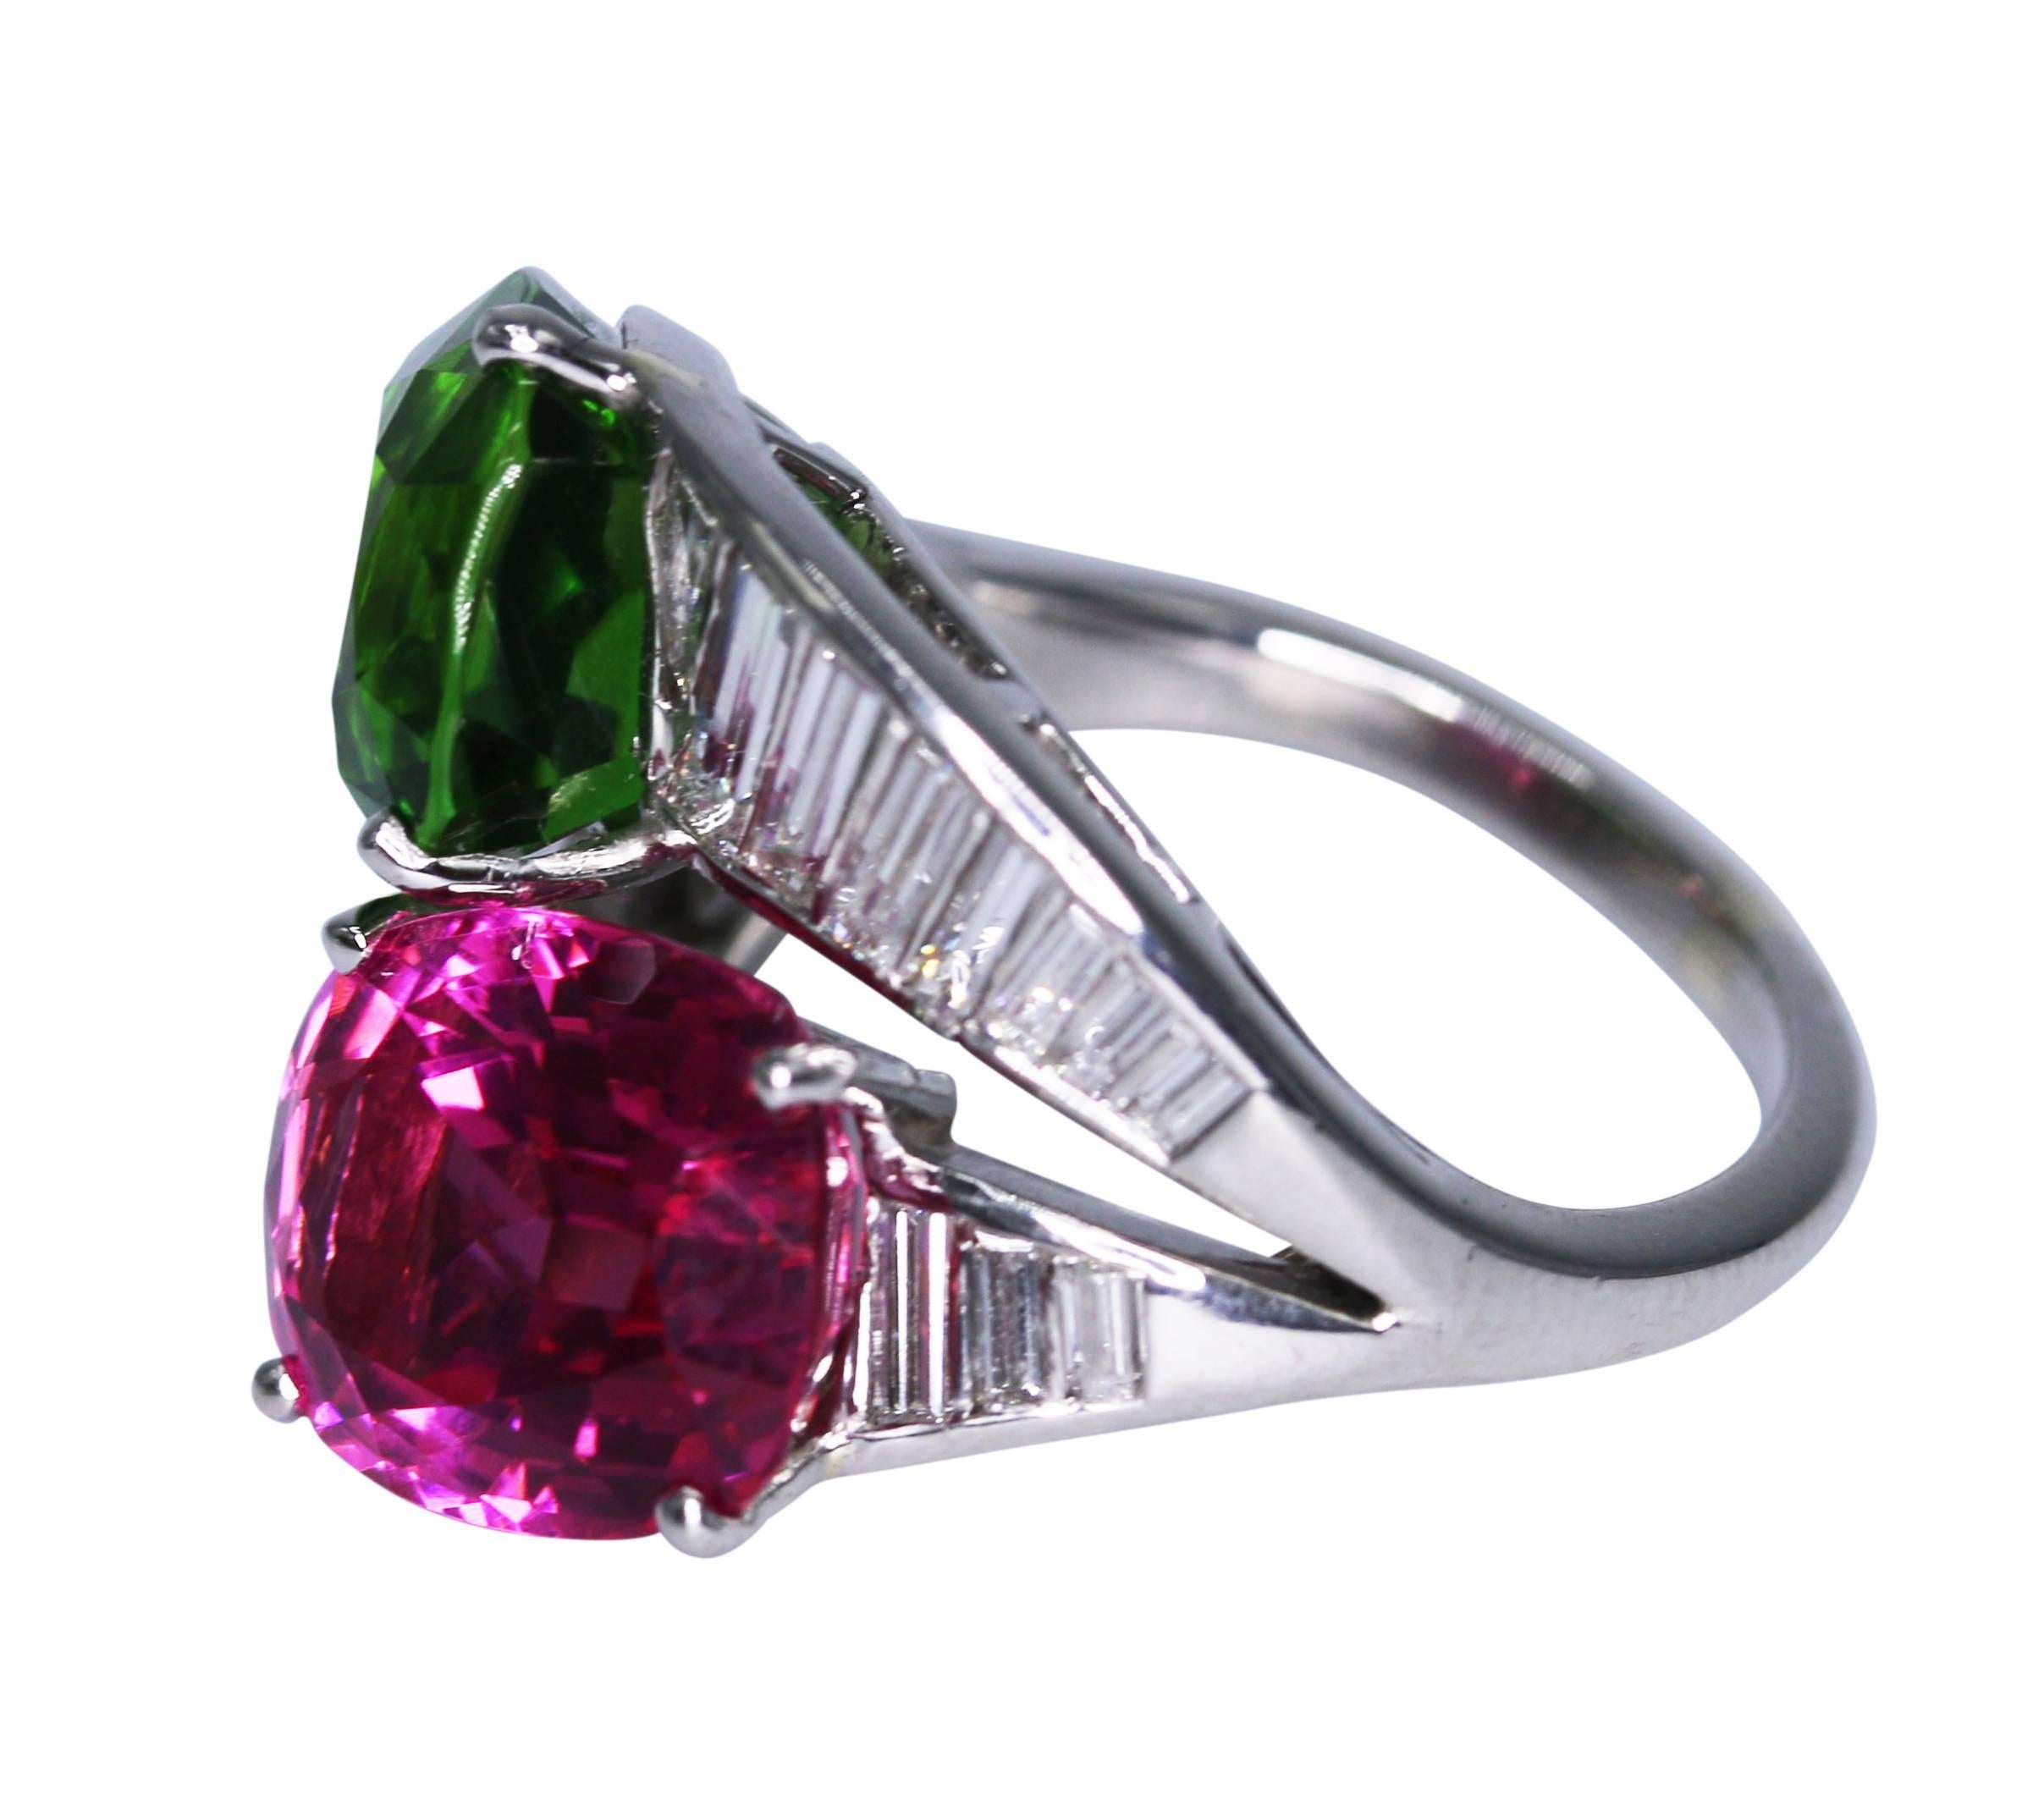 Platinum, gem quality tourmaline and diamond crossover ring, set with 2 large pink and green gem quality tourmalines weighing approximately 10.00 carats, accented by diamonds weighing approximately 1.20 carats, gross weight 11.9 grams, size 6 1/2,